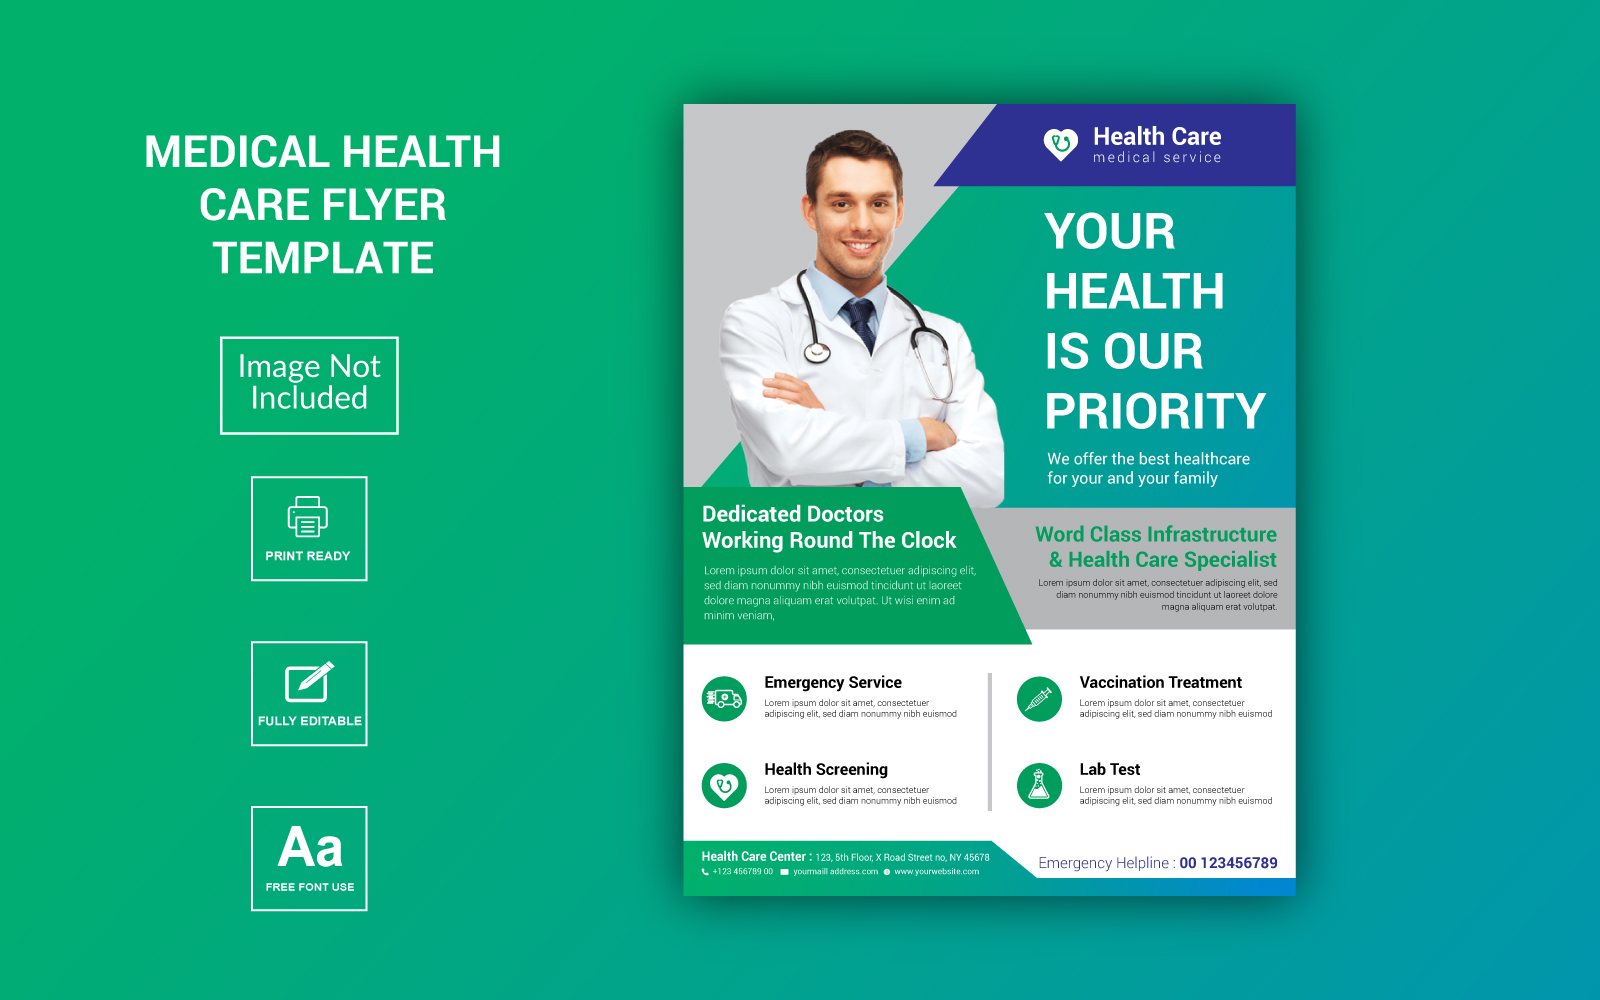 Medical Health Care Flyer - Corporate Identity Template